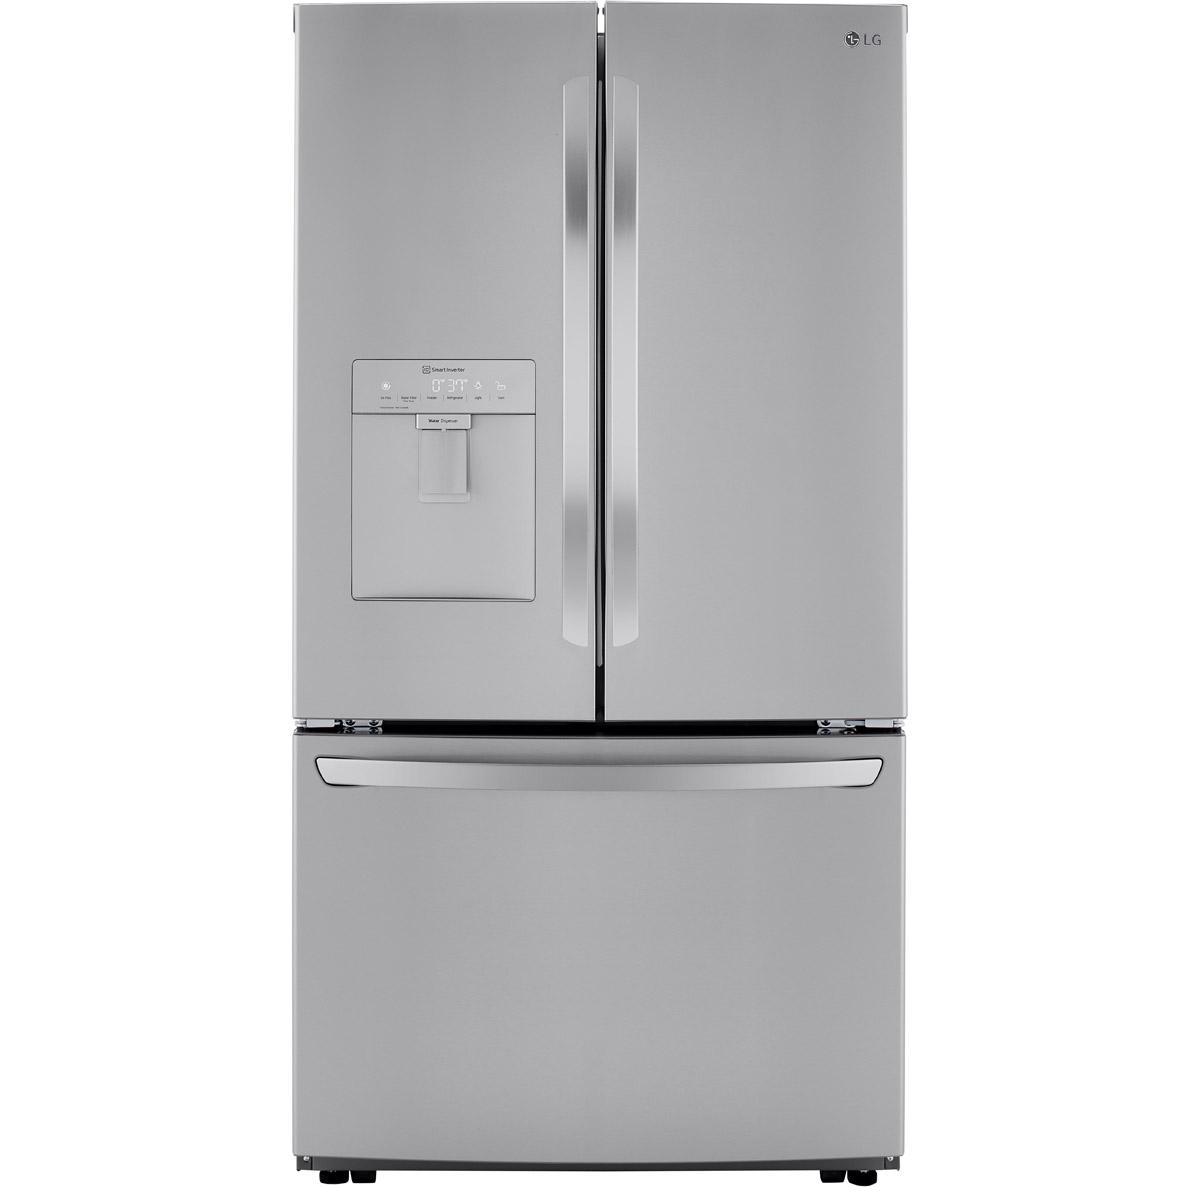 LG French Door Refrigerator with Slim Design Water Dispenser for $1199.99 Shipped